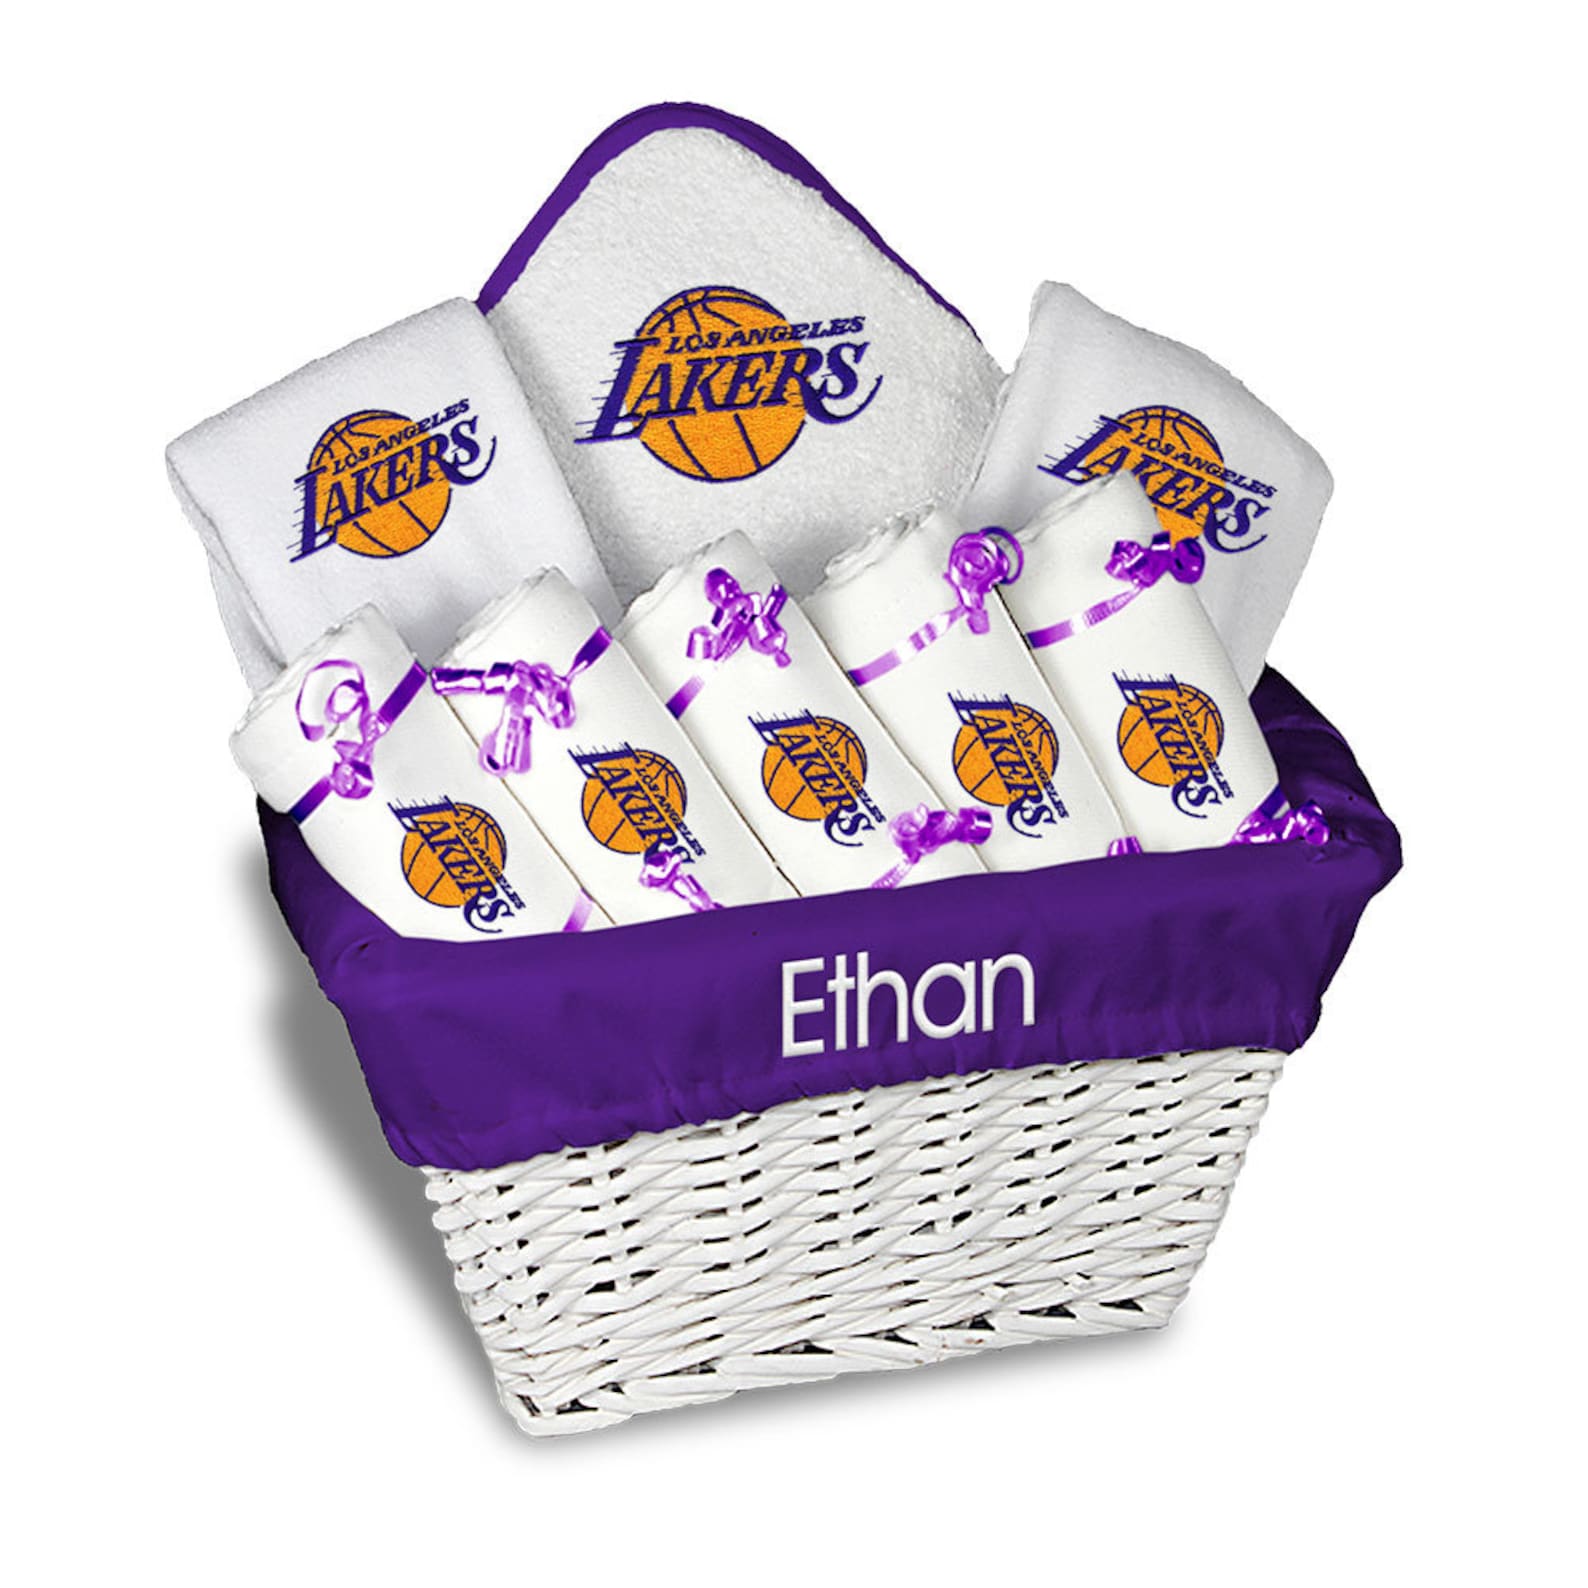 Personalized NBA Los Angeles Lakers Baby Gift Basket Bibs